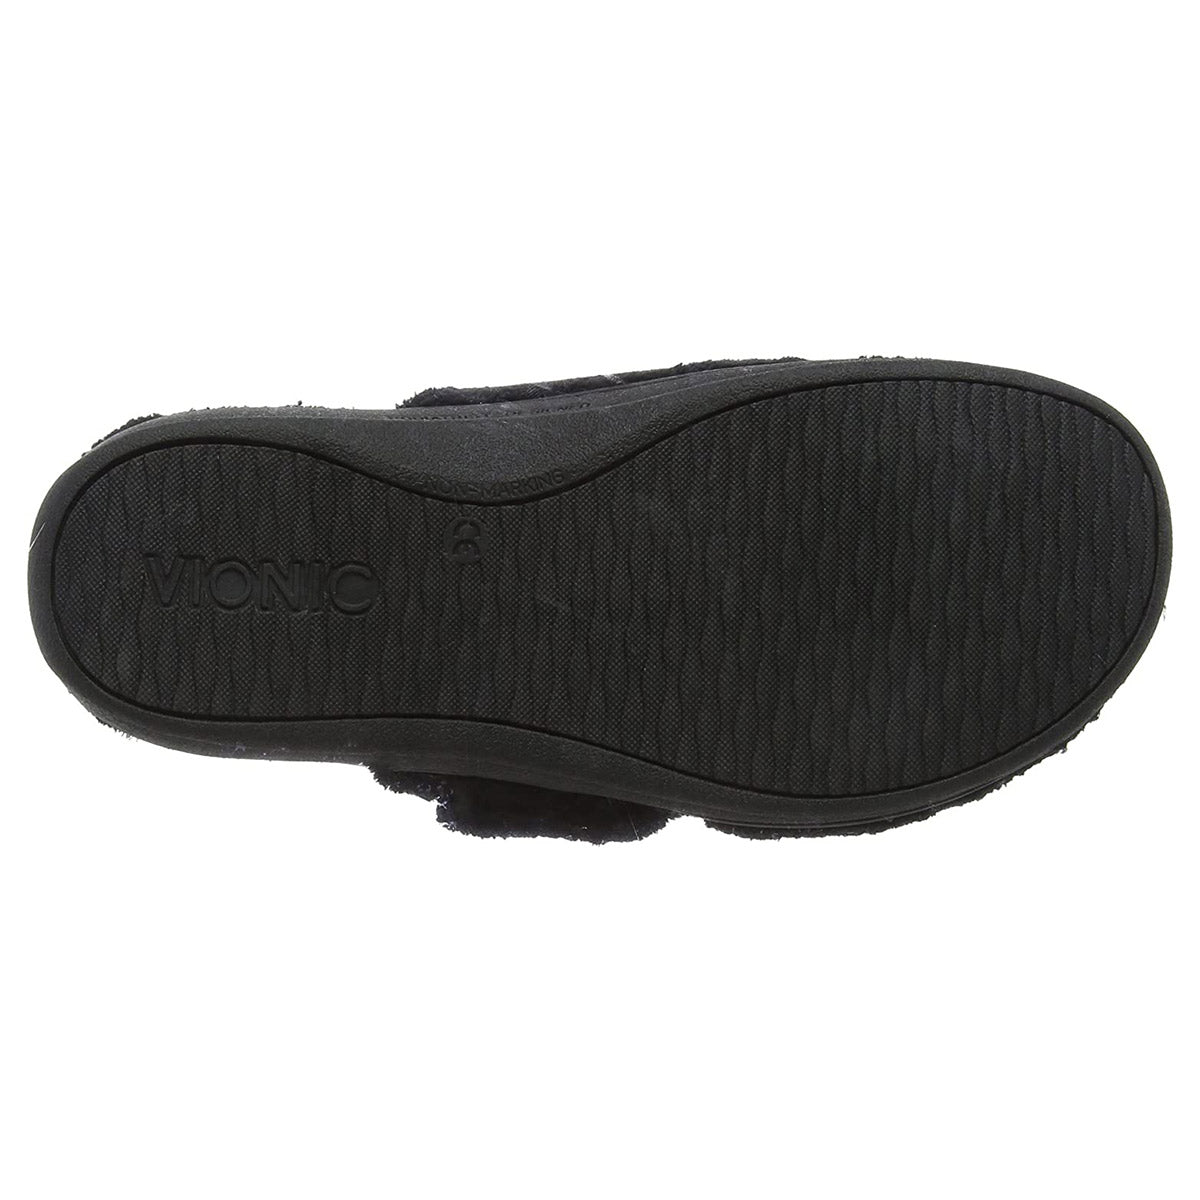 The image shows the sole of a black VIONIC GEMMA BLACK - WOMENS slipper with a textured surface and the brand name &quot;Vionic&quot; imprinted on it, highlighting its excellent arch support.